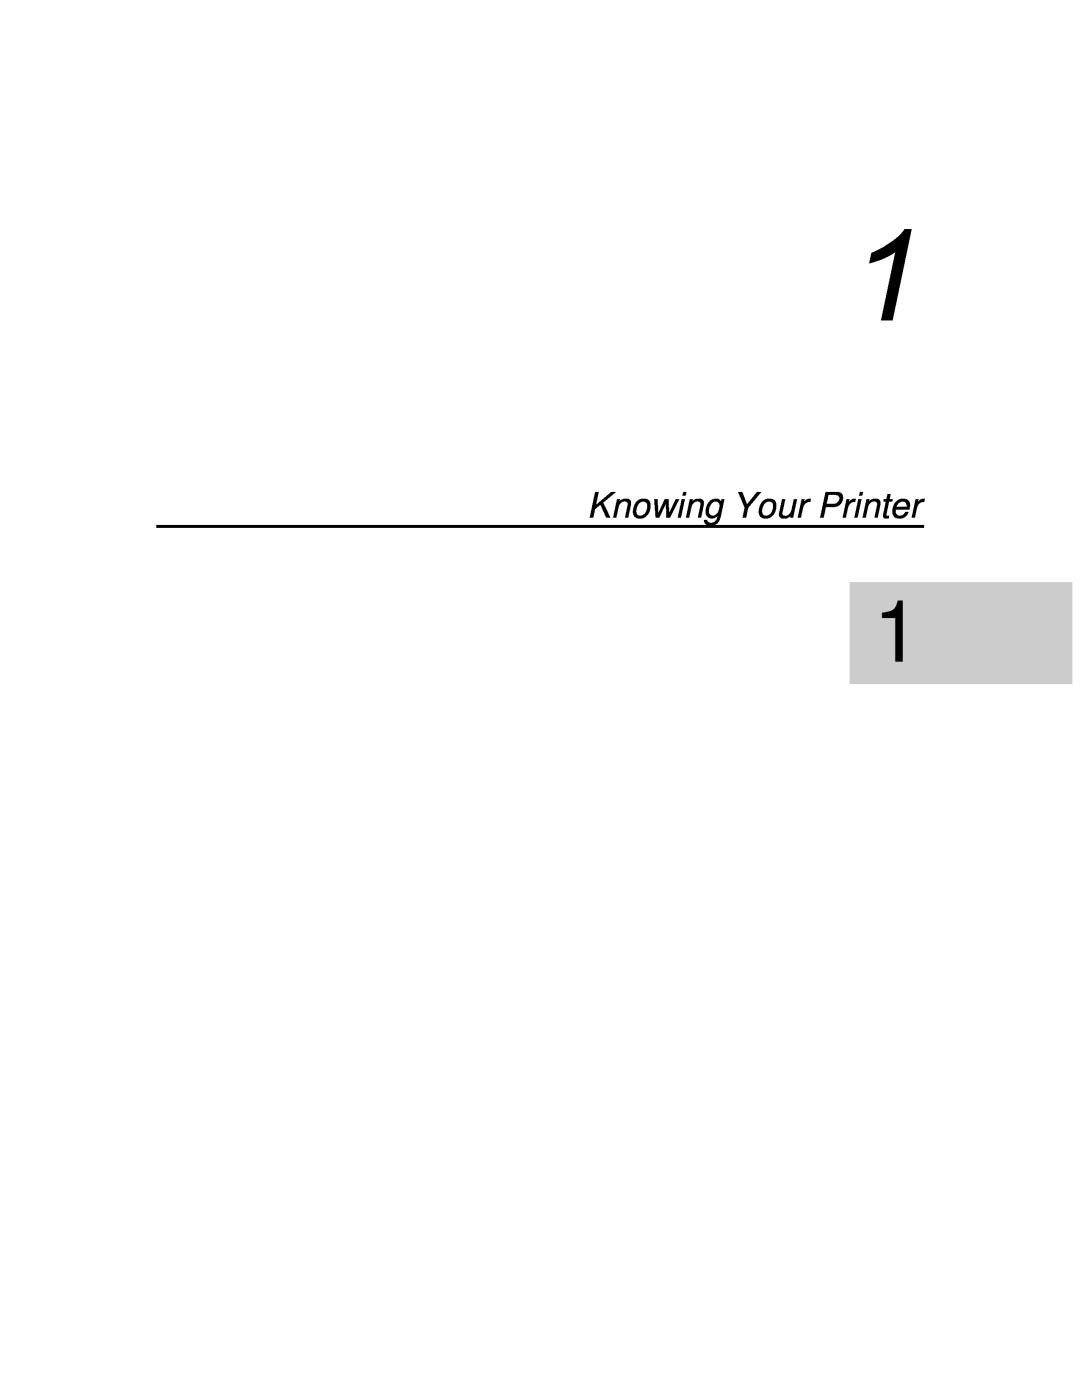 Xerox P12 manual Knowing Your Printer 